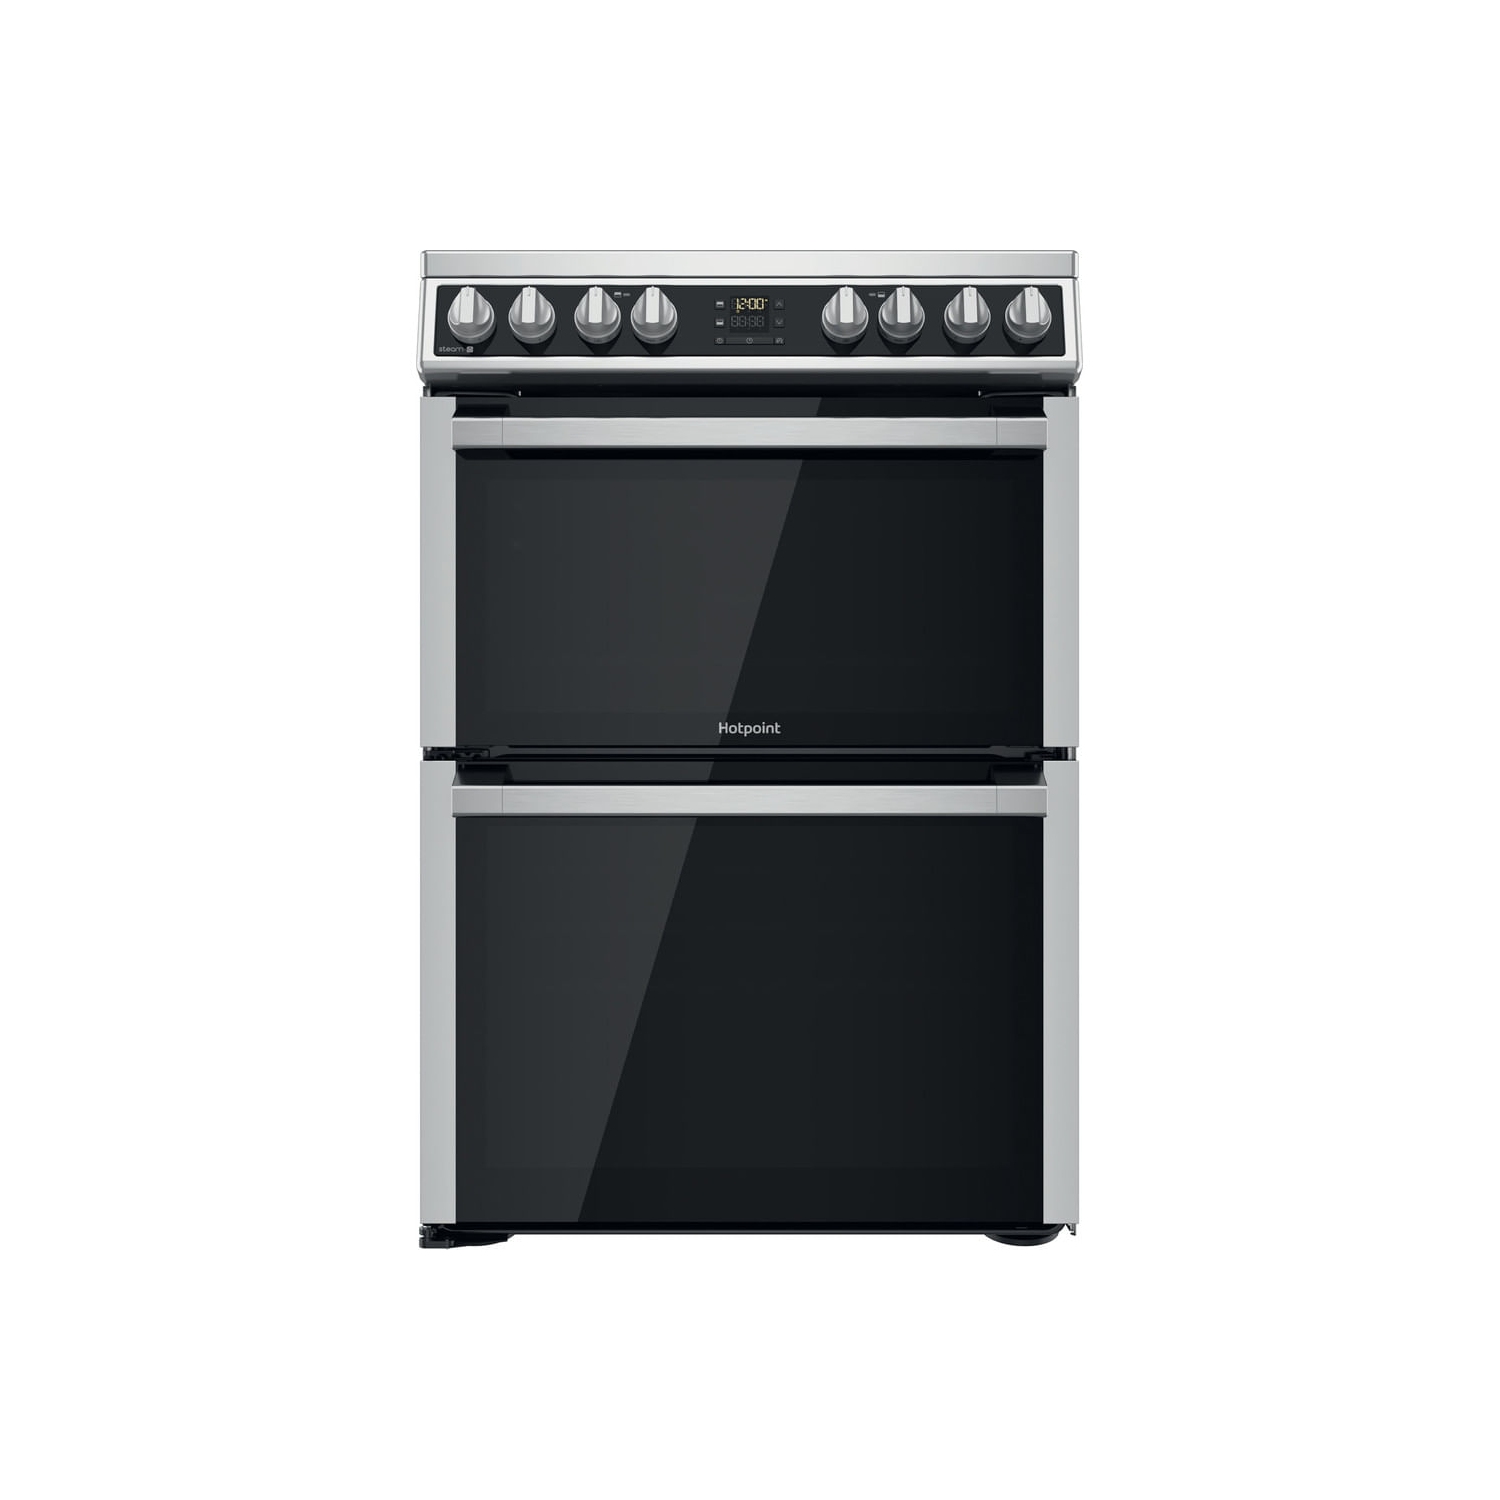 Hotpoint Freestanding Electric Ceramic Cooker with 2 Fan Ovens - 0